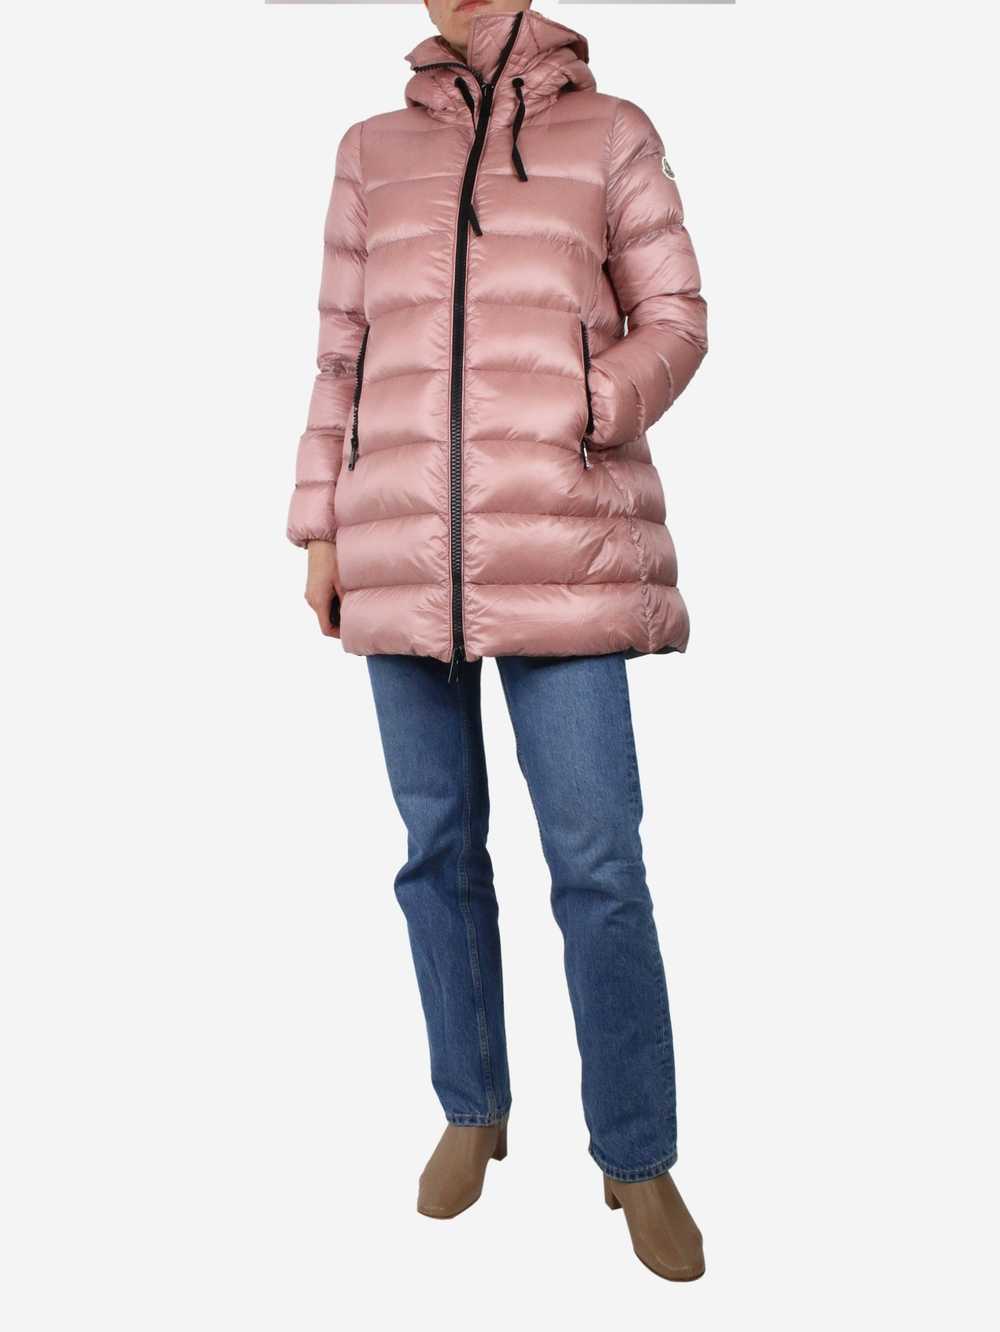 Moncler Pink puffer coat - size 2 - image 7